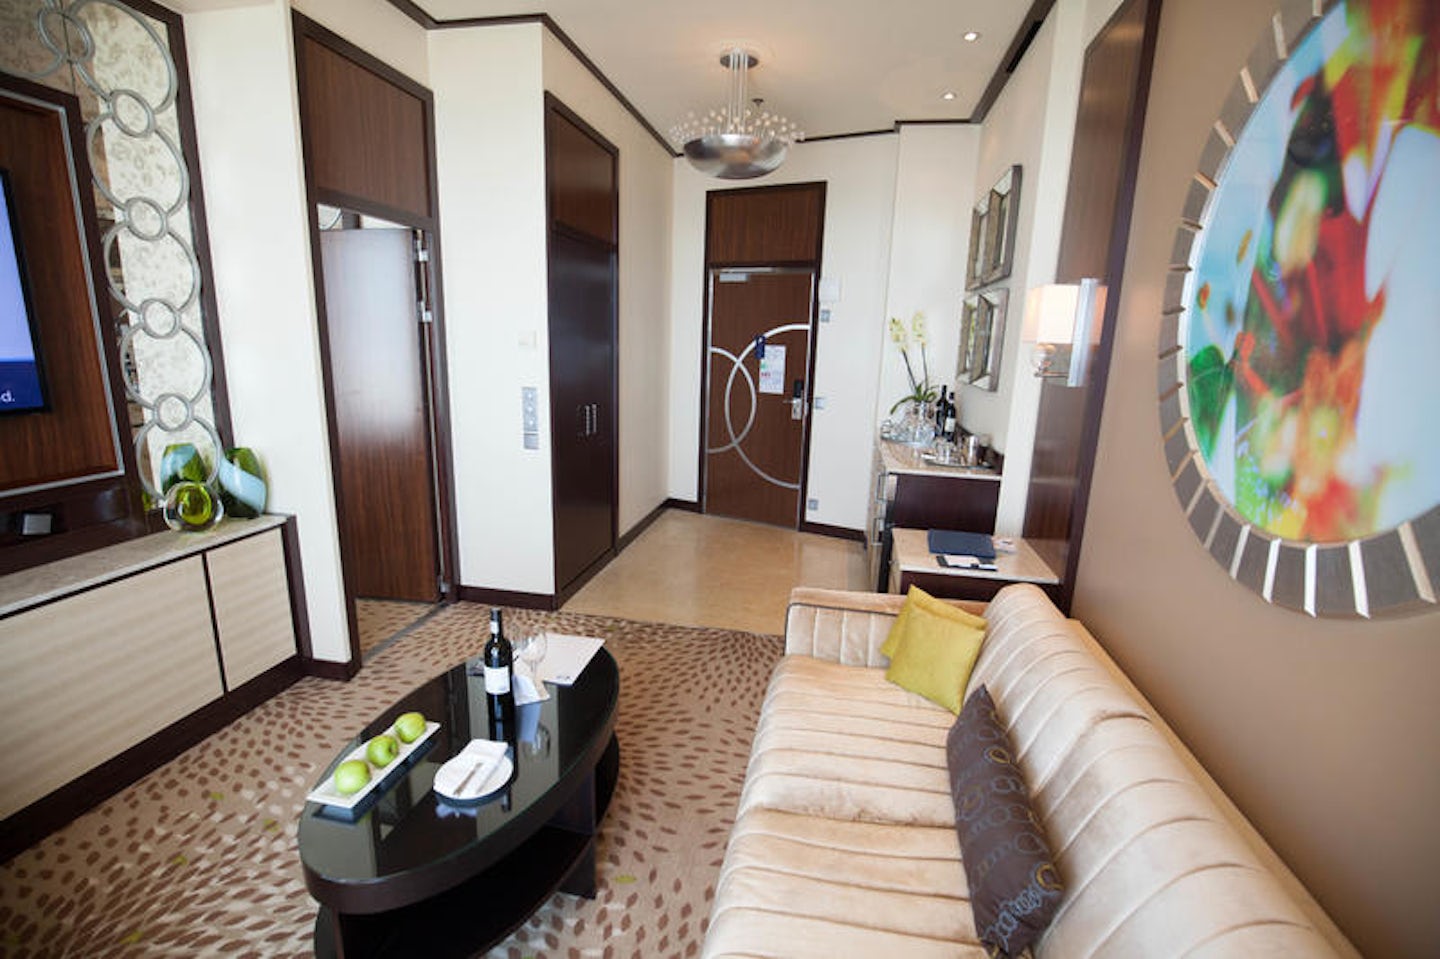 The Signature Suite on Celebrity Reflection